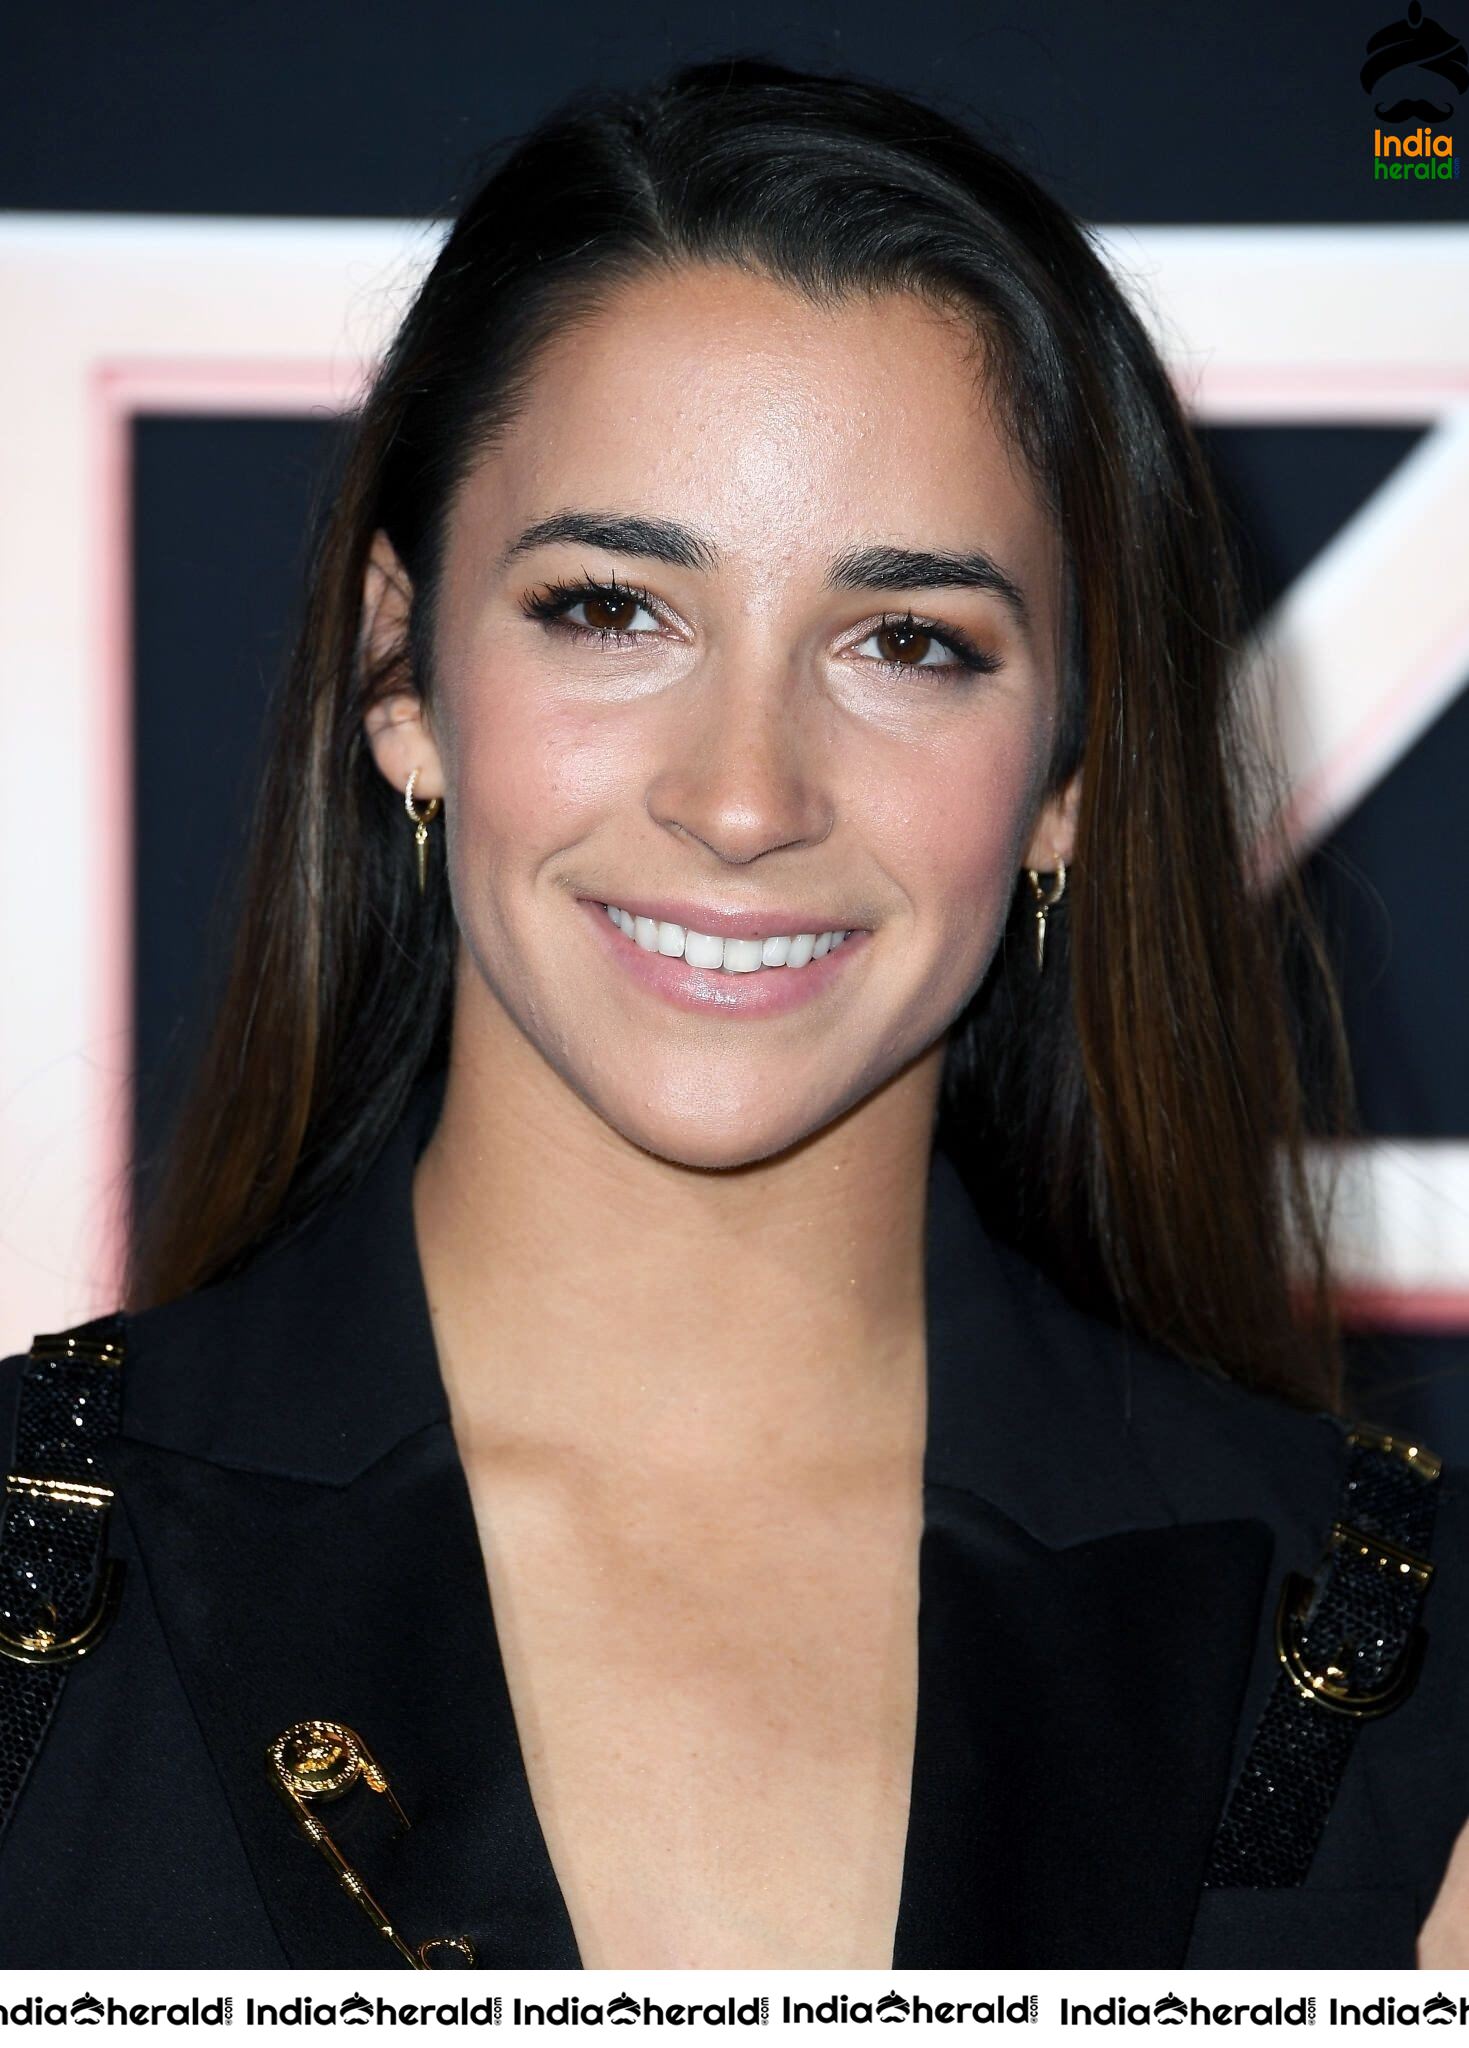 Aly Raisman at Charlies Angeles Premiere in Los Angeles